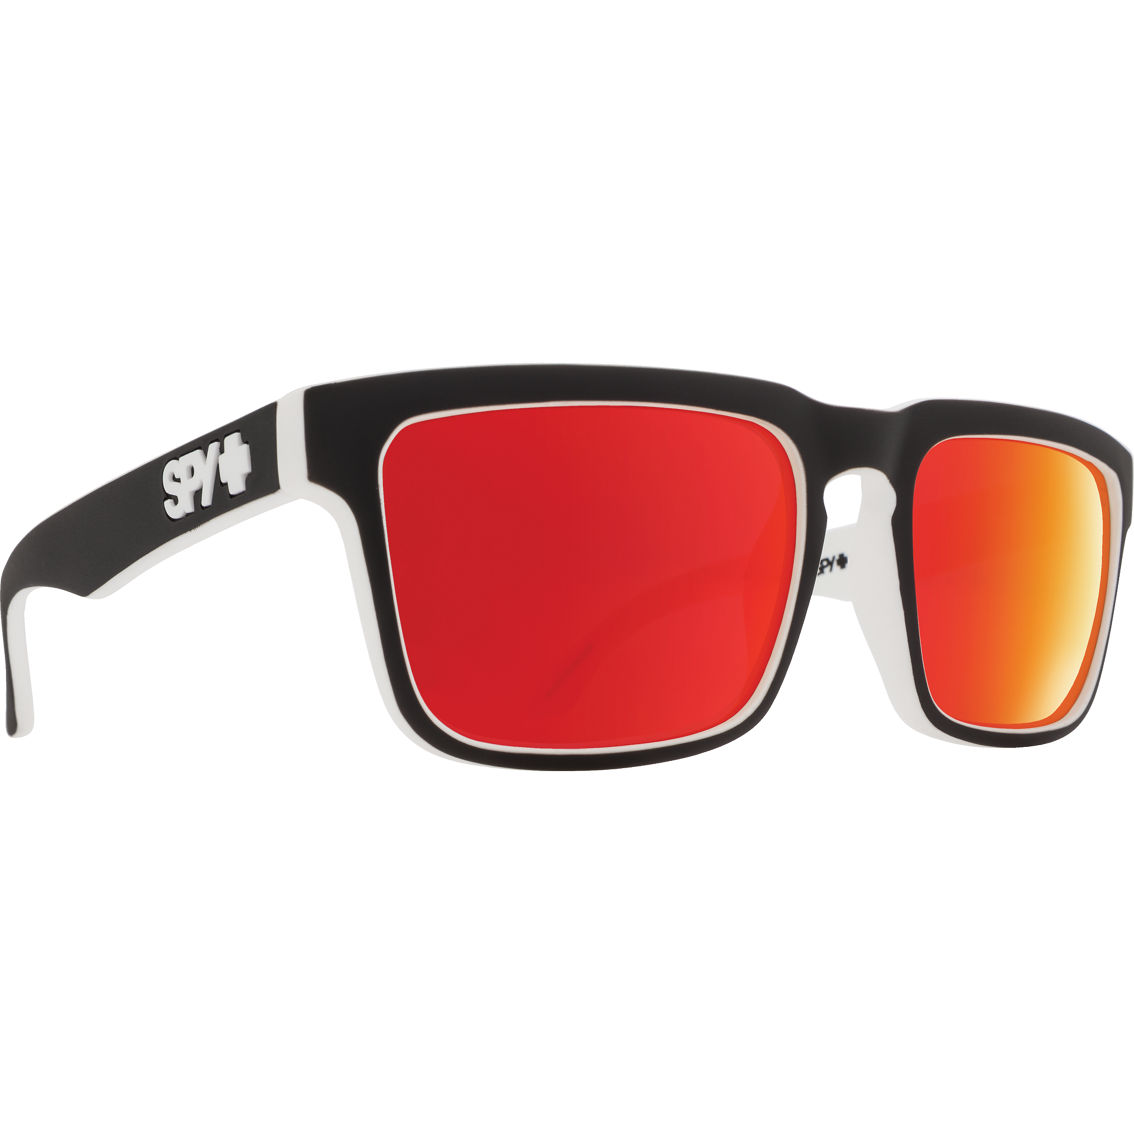 Spy Optic Helm Whitewall Red Sunglasses 673015209365 - Image 5 of 5